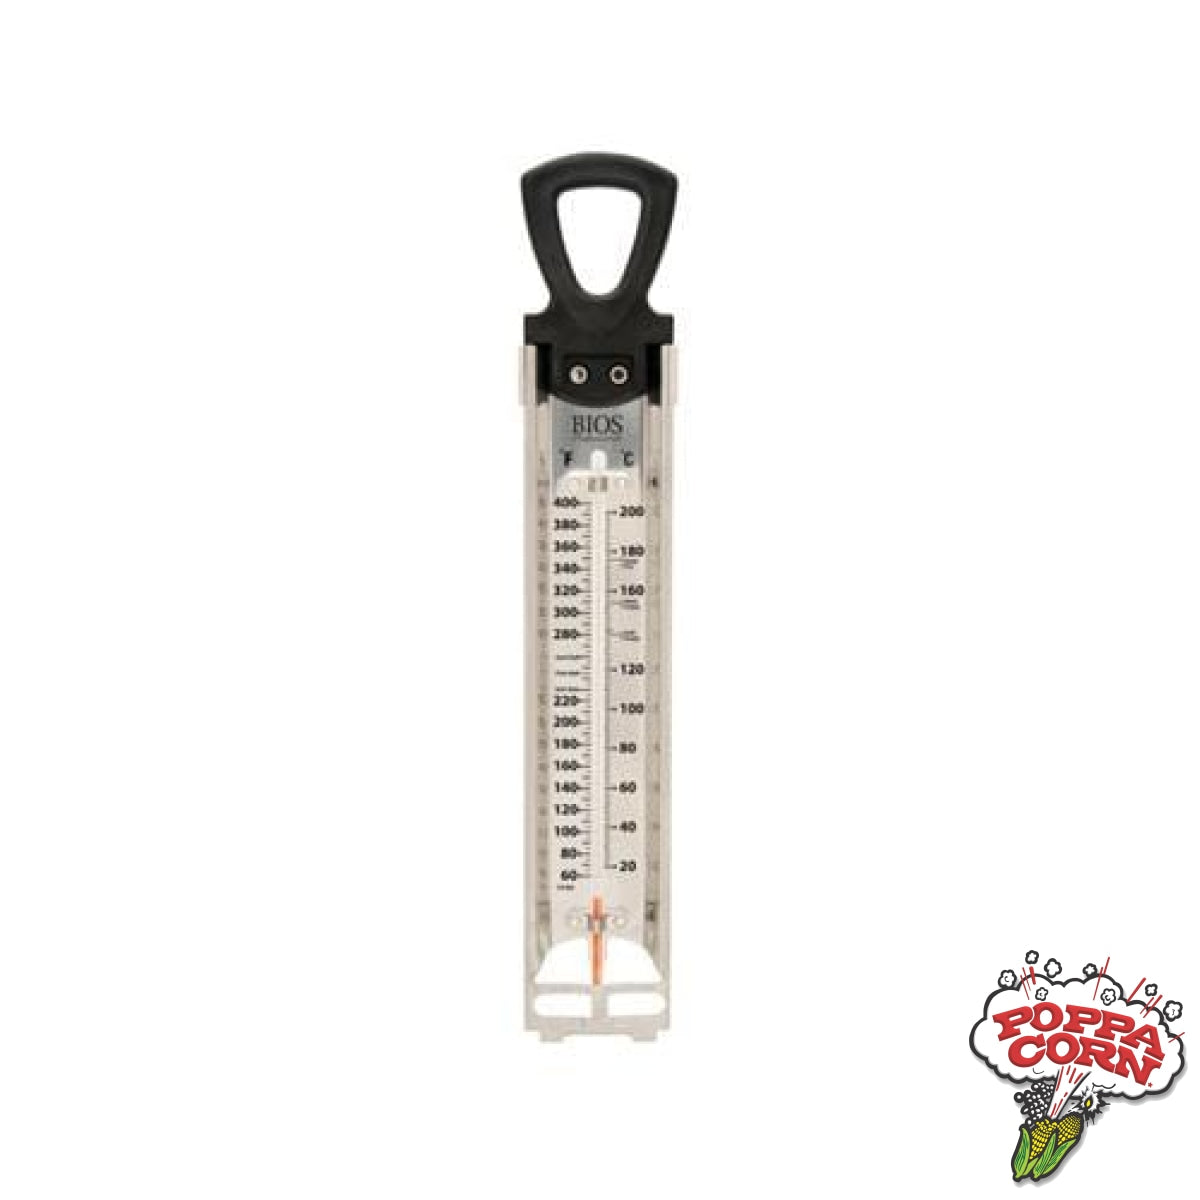 DT158 - Bios Professional Candy / Deep Fry Thermometer - Poppa Corn Corp